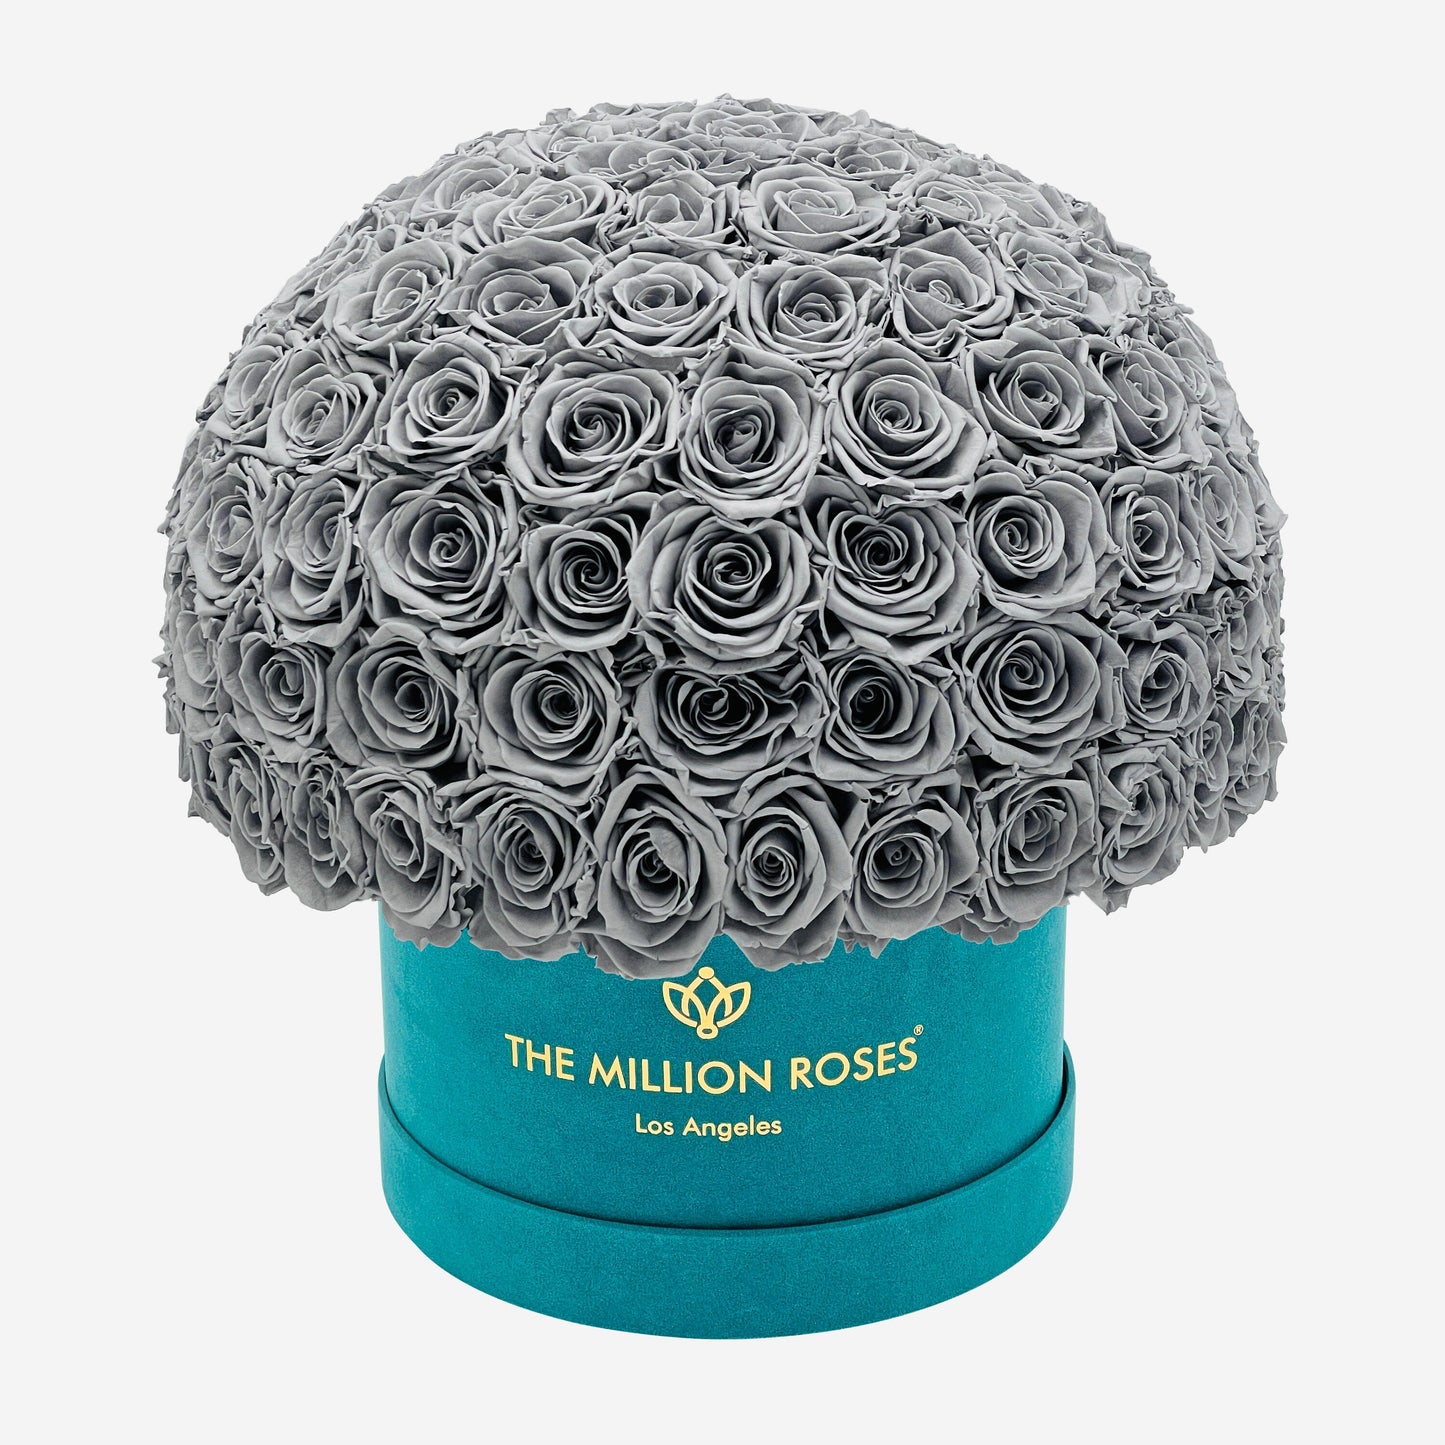 Supreme Dark Green Suede Superdome Box | Pastel Grey Roses - The Million Roses